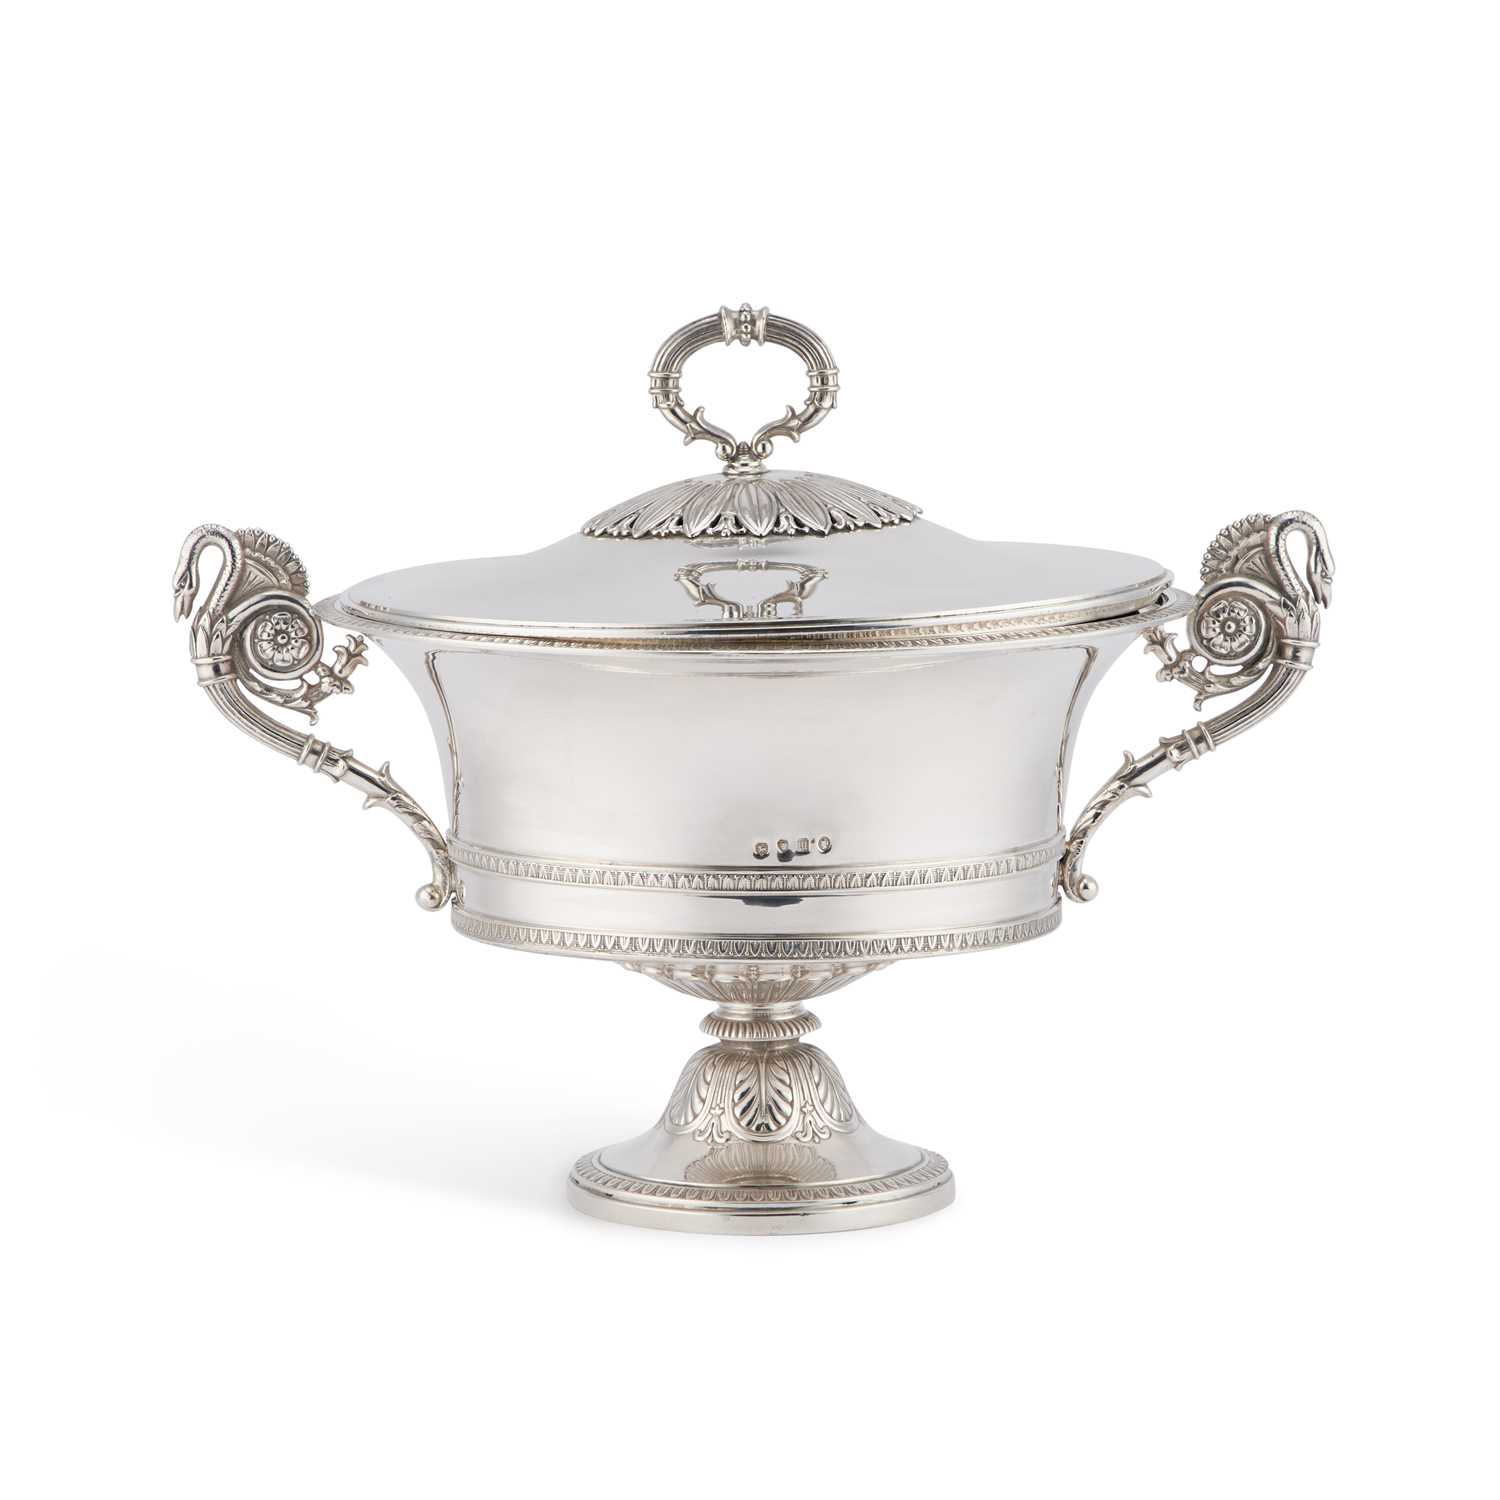 A VICTORIAN SILVER TUREEN AND COVER